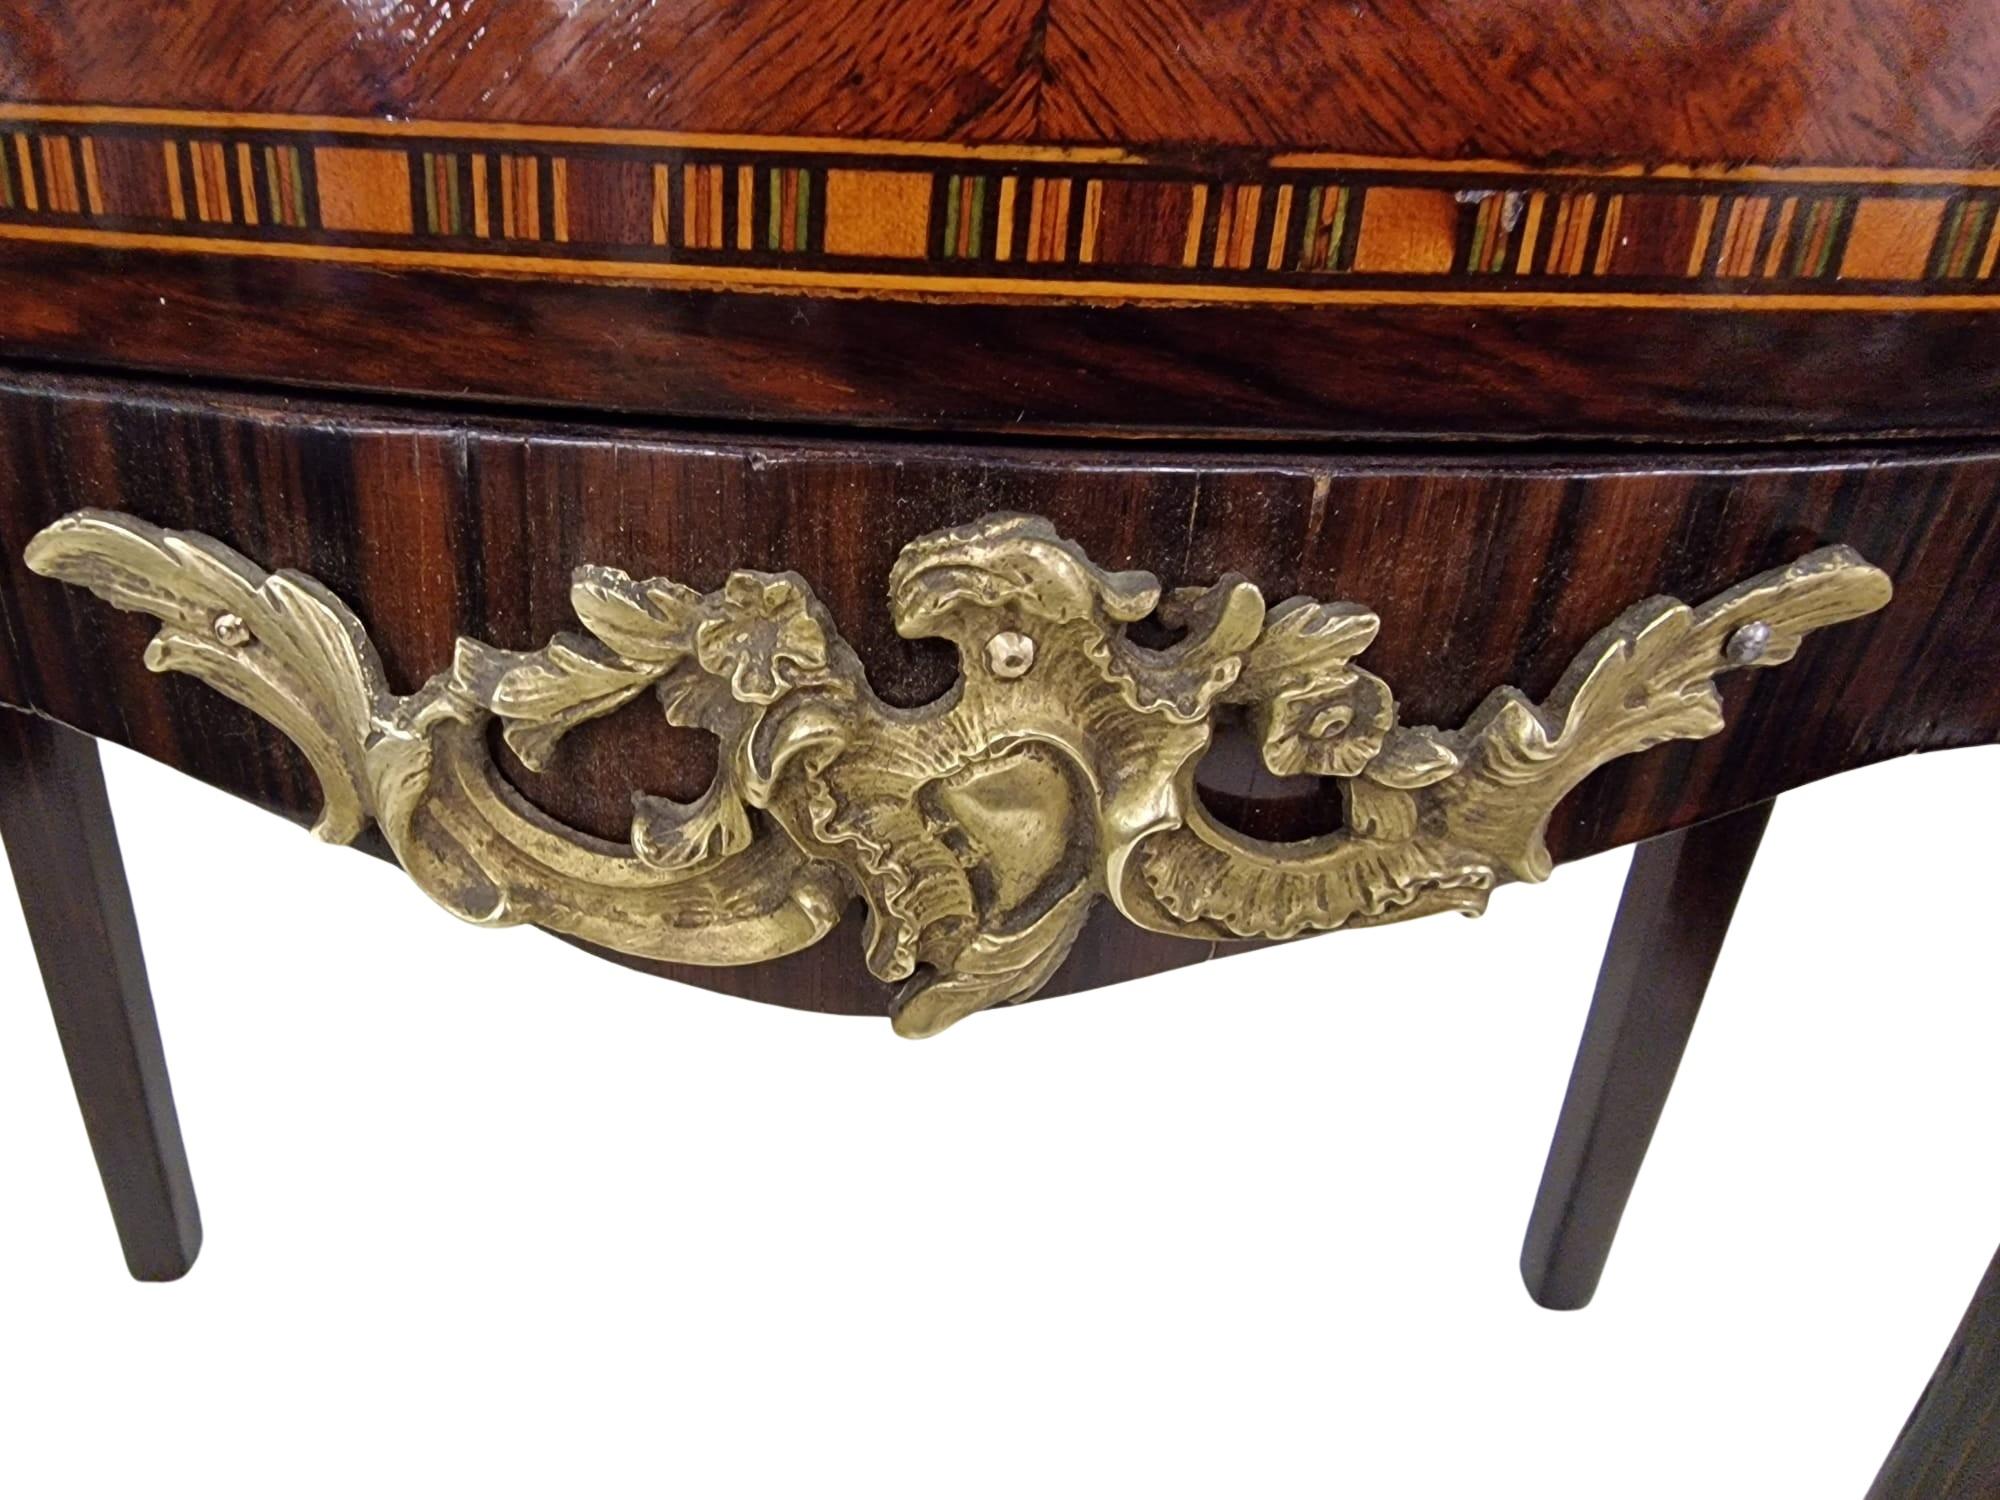 This excellent chest of drawers was manufactured in the 1st half of the 19th century, in France. It is a piece of outstanding craftsmanship, the traces of the old tools can be seen, for example, on the surface on the top. tThe front and sides are